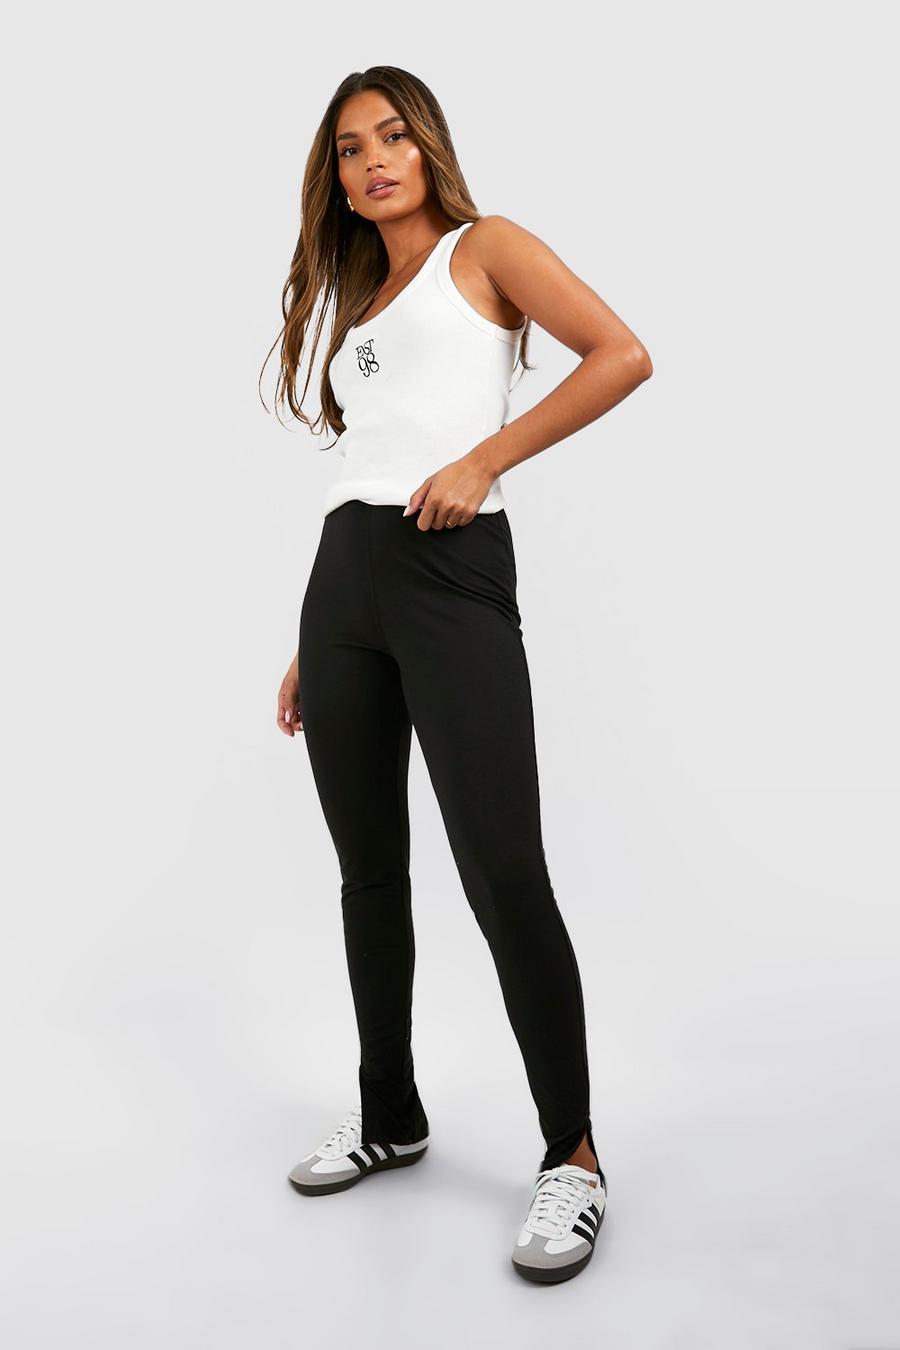 LAST CLANCE SALE! Women Corset High Waisted Leggings with